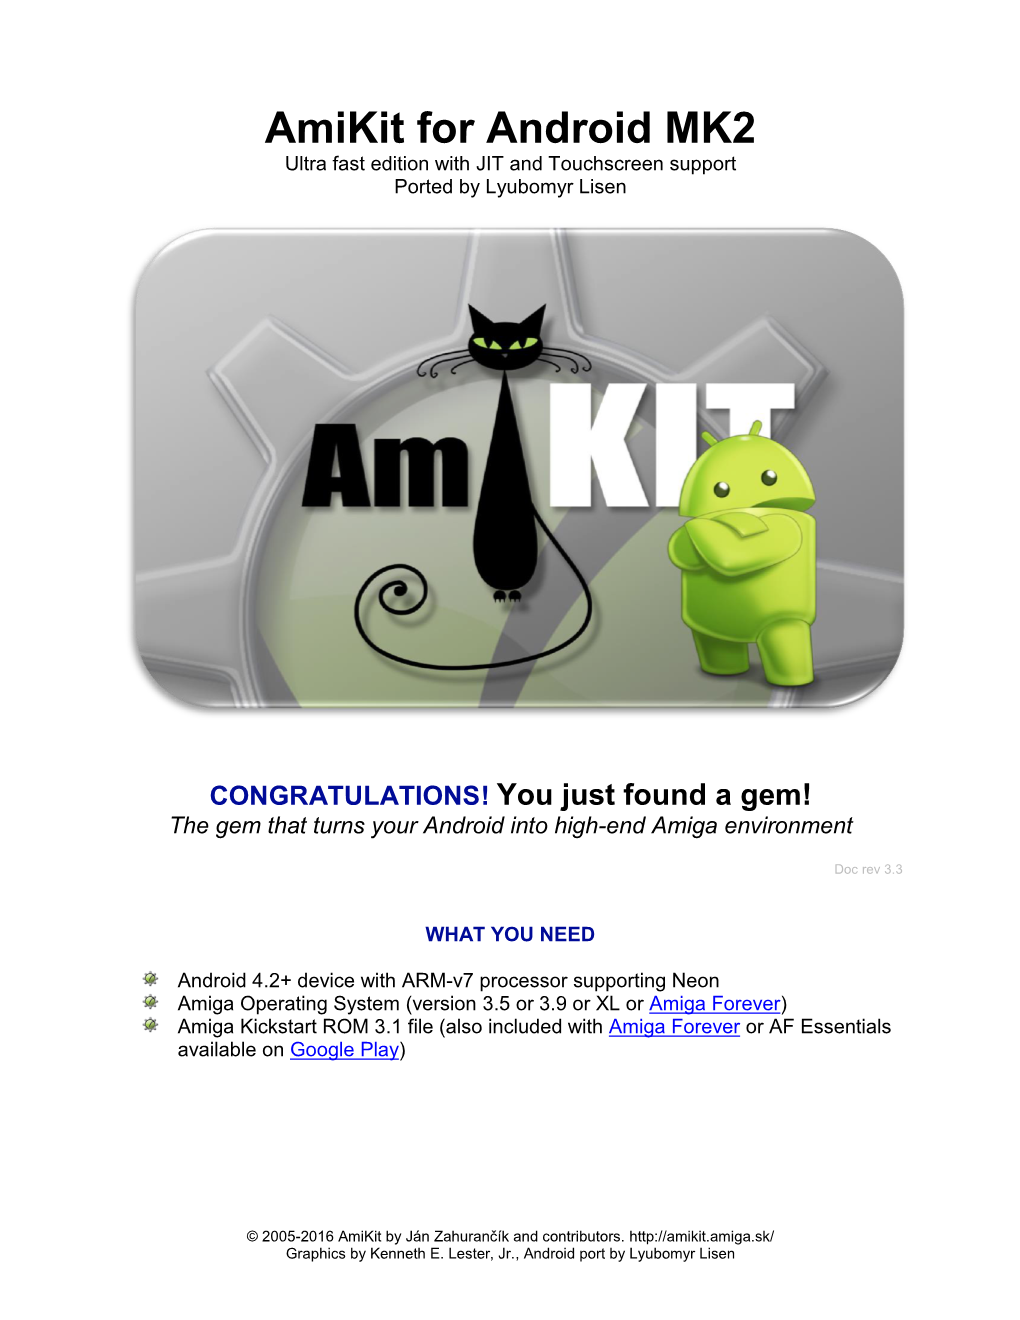 Amikit for Android MK2 Ultra Fast Edition with JIT and Touchscreen Support Ported by Lyubomyr Lisen